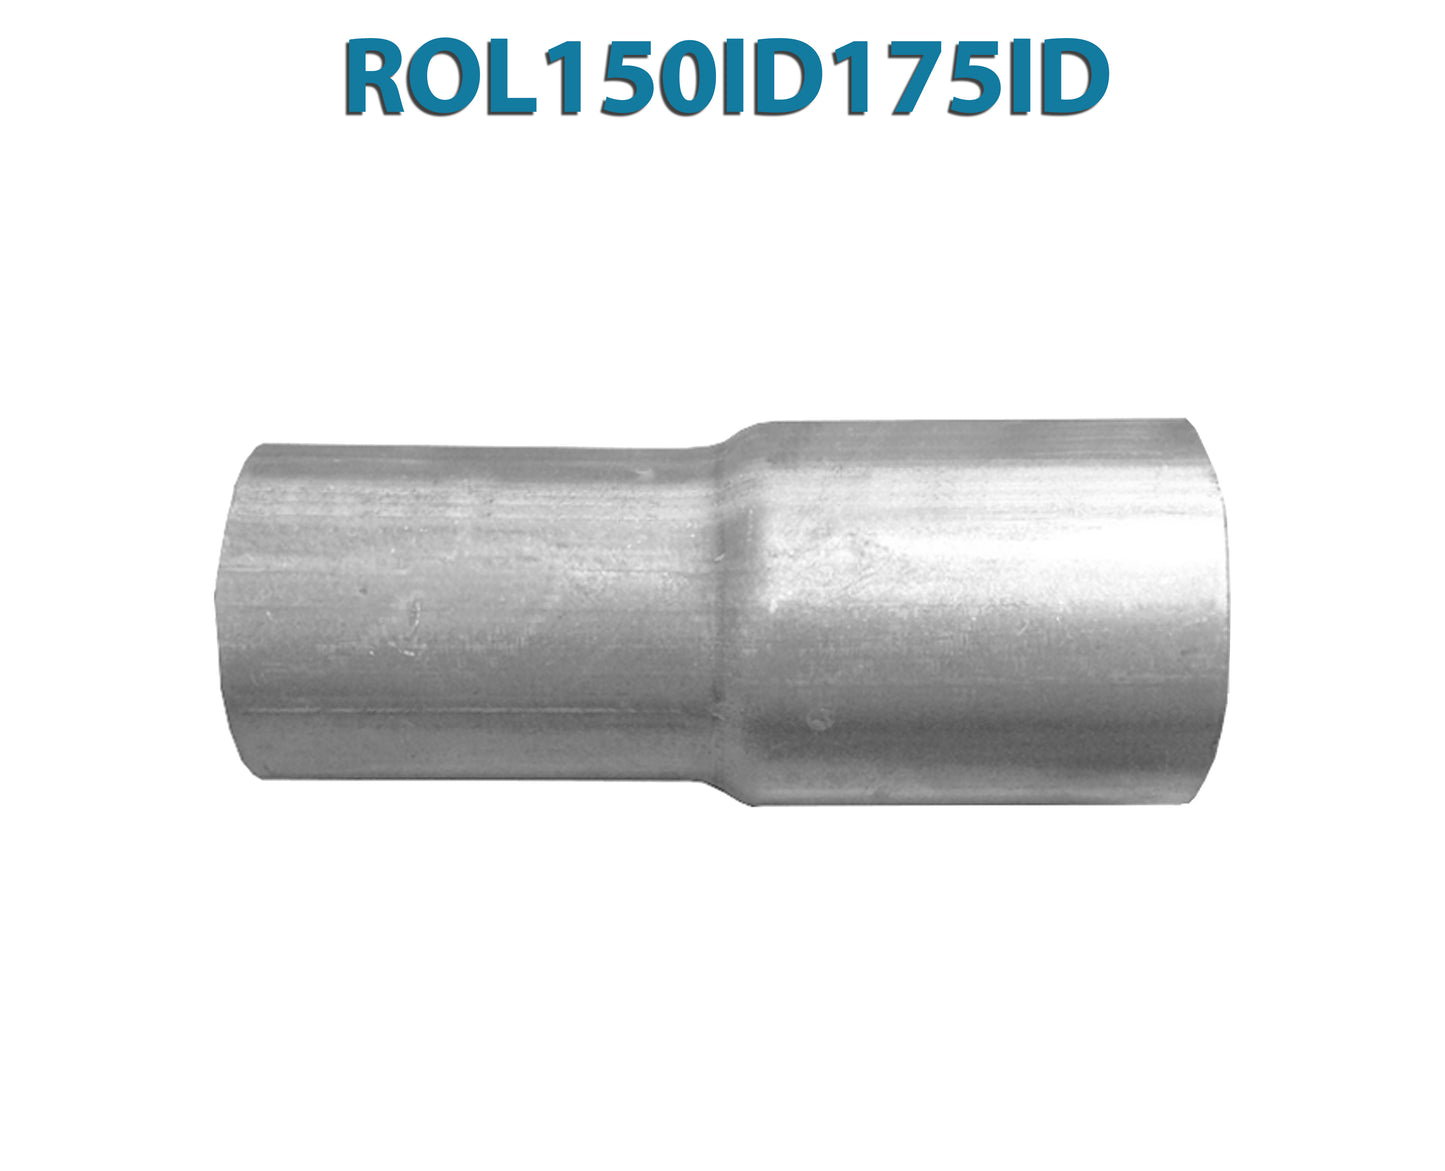 ROL150ID175ID 548548 1 1/2” ID to 1 3/4” ID Universal Exhaust Pipe to Pipe Adapter Reducer